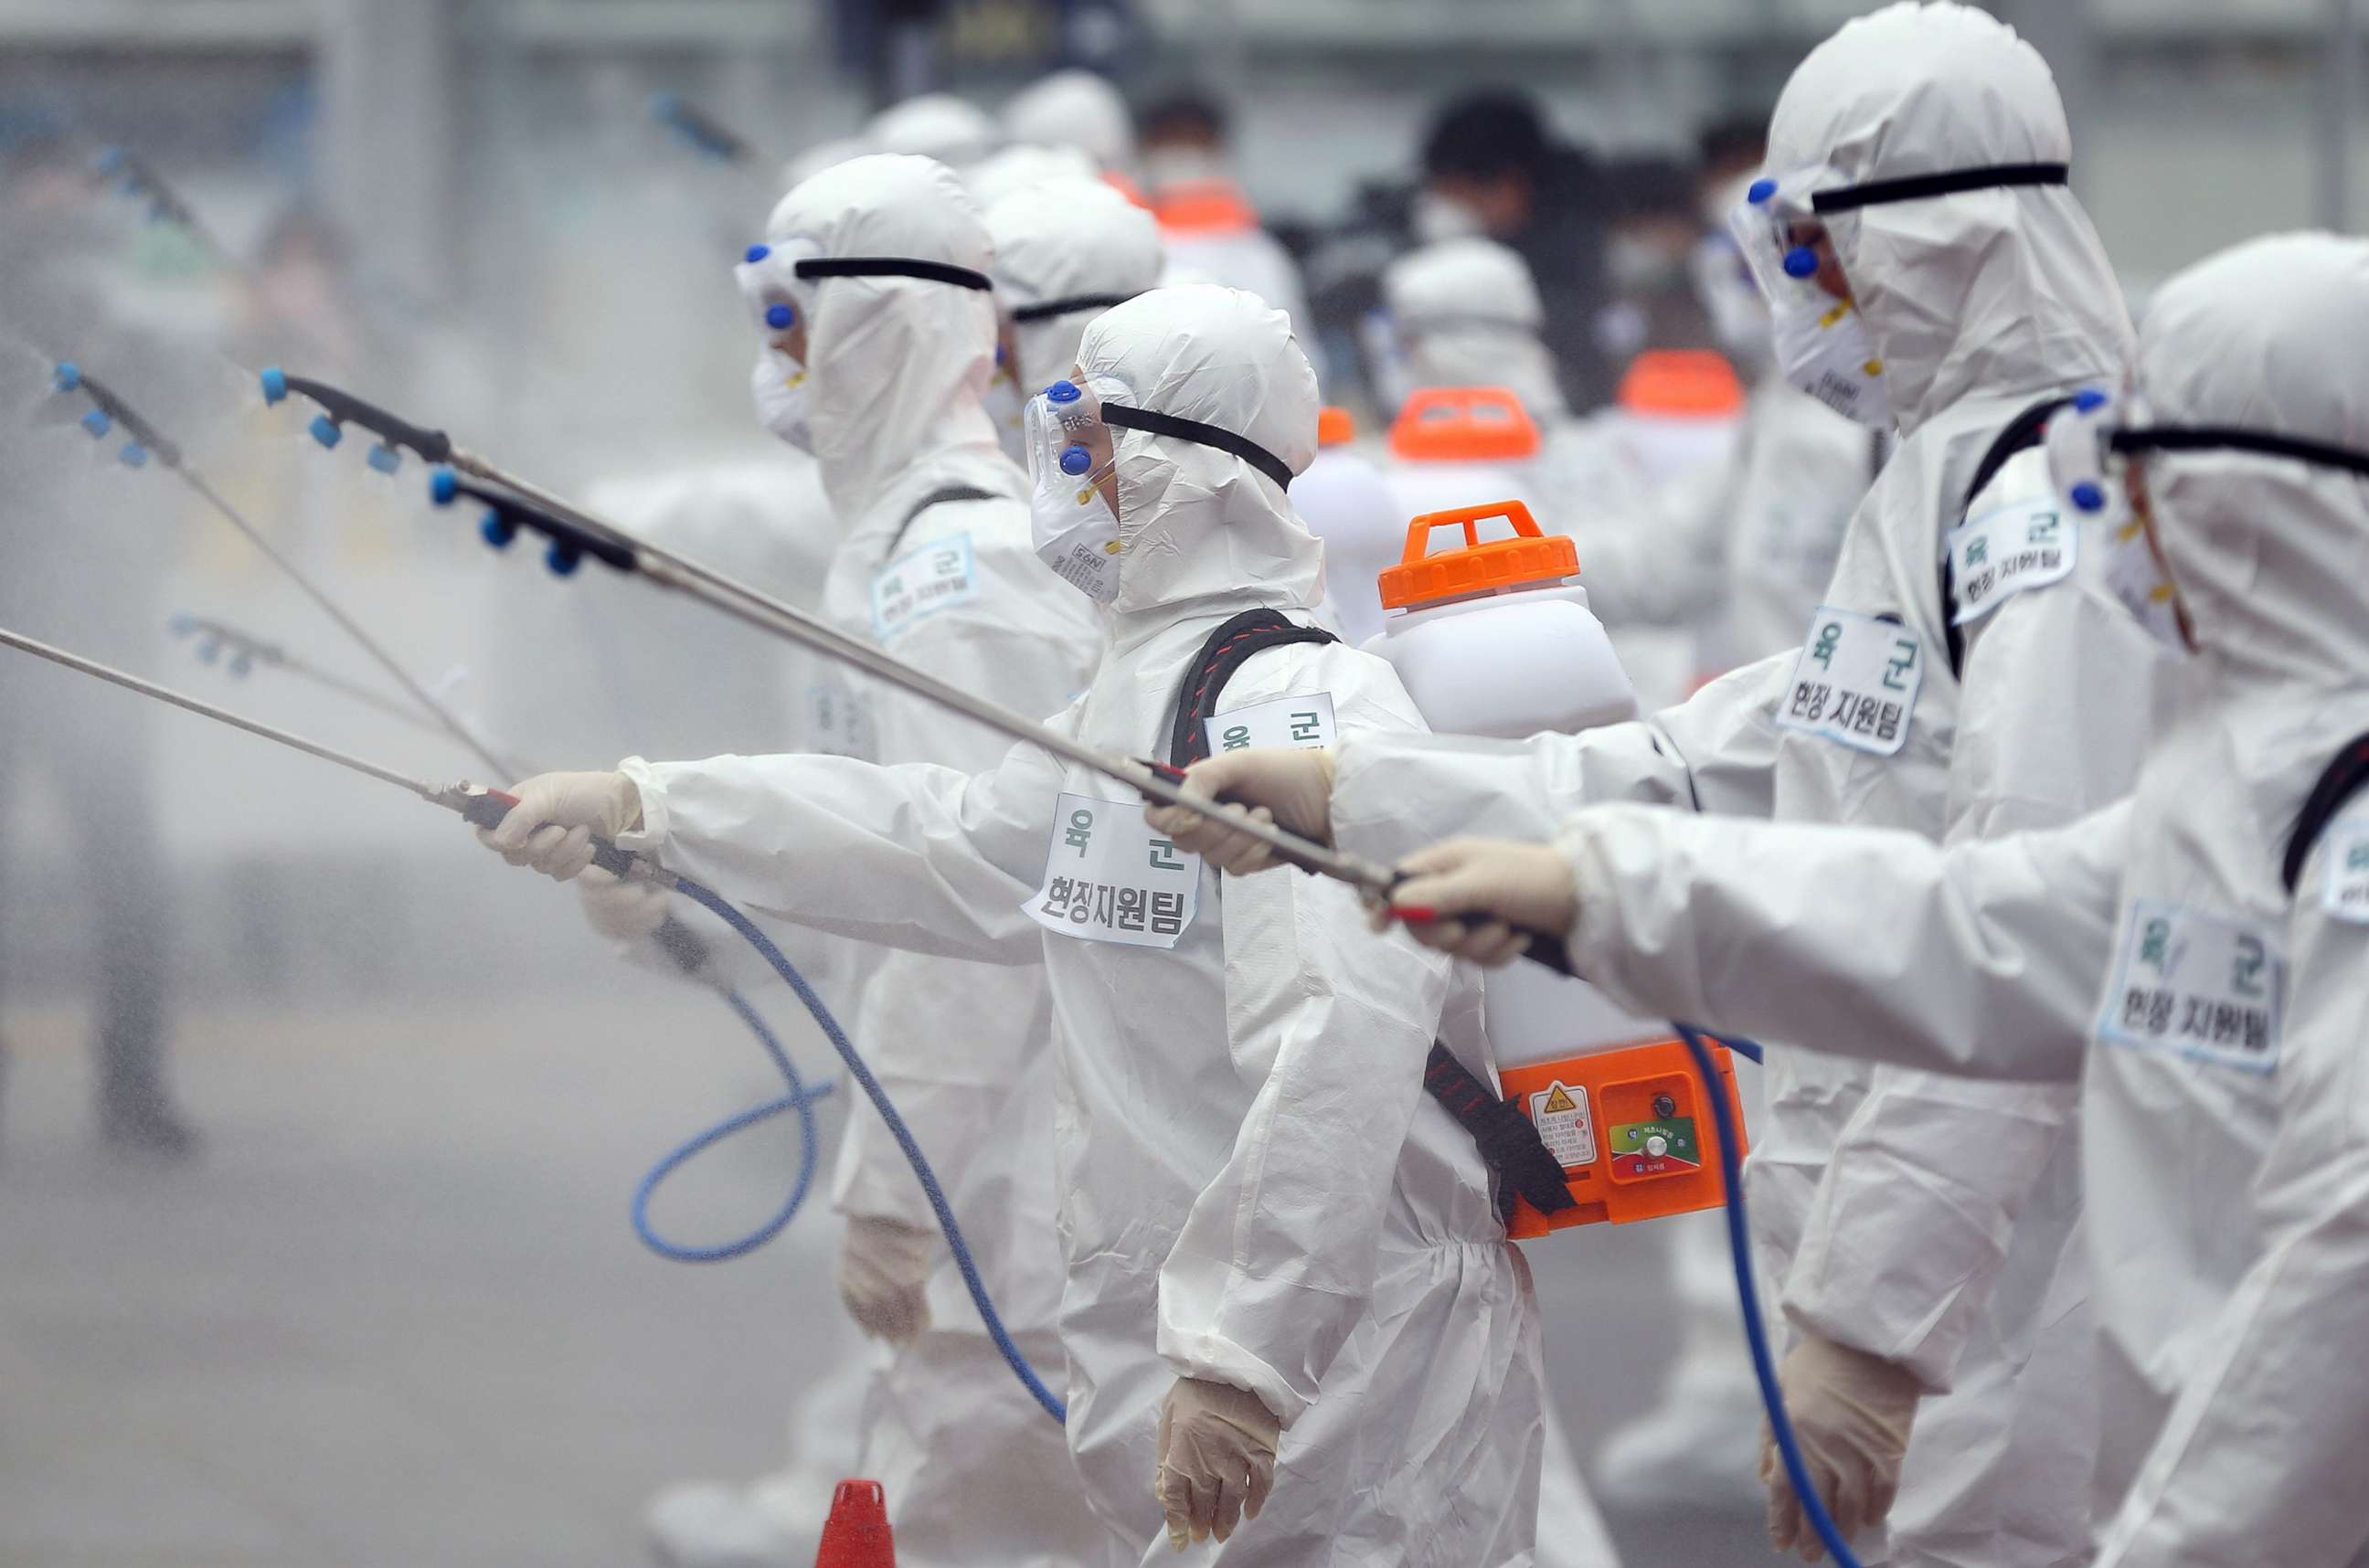 PHOTO: Soldiers wearing protective gear spray disinfectant as part of preventive measures against the spread of the coronavirus, at Dongdaegu railway station in Daegu, South Korea, Feb. 29, 2020. 